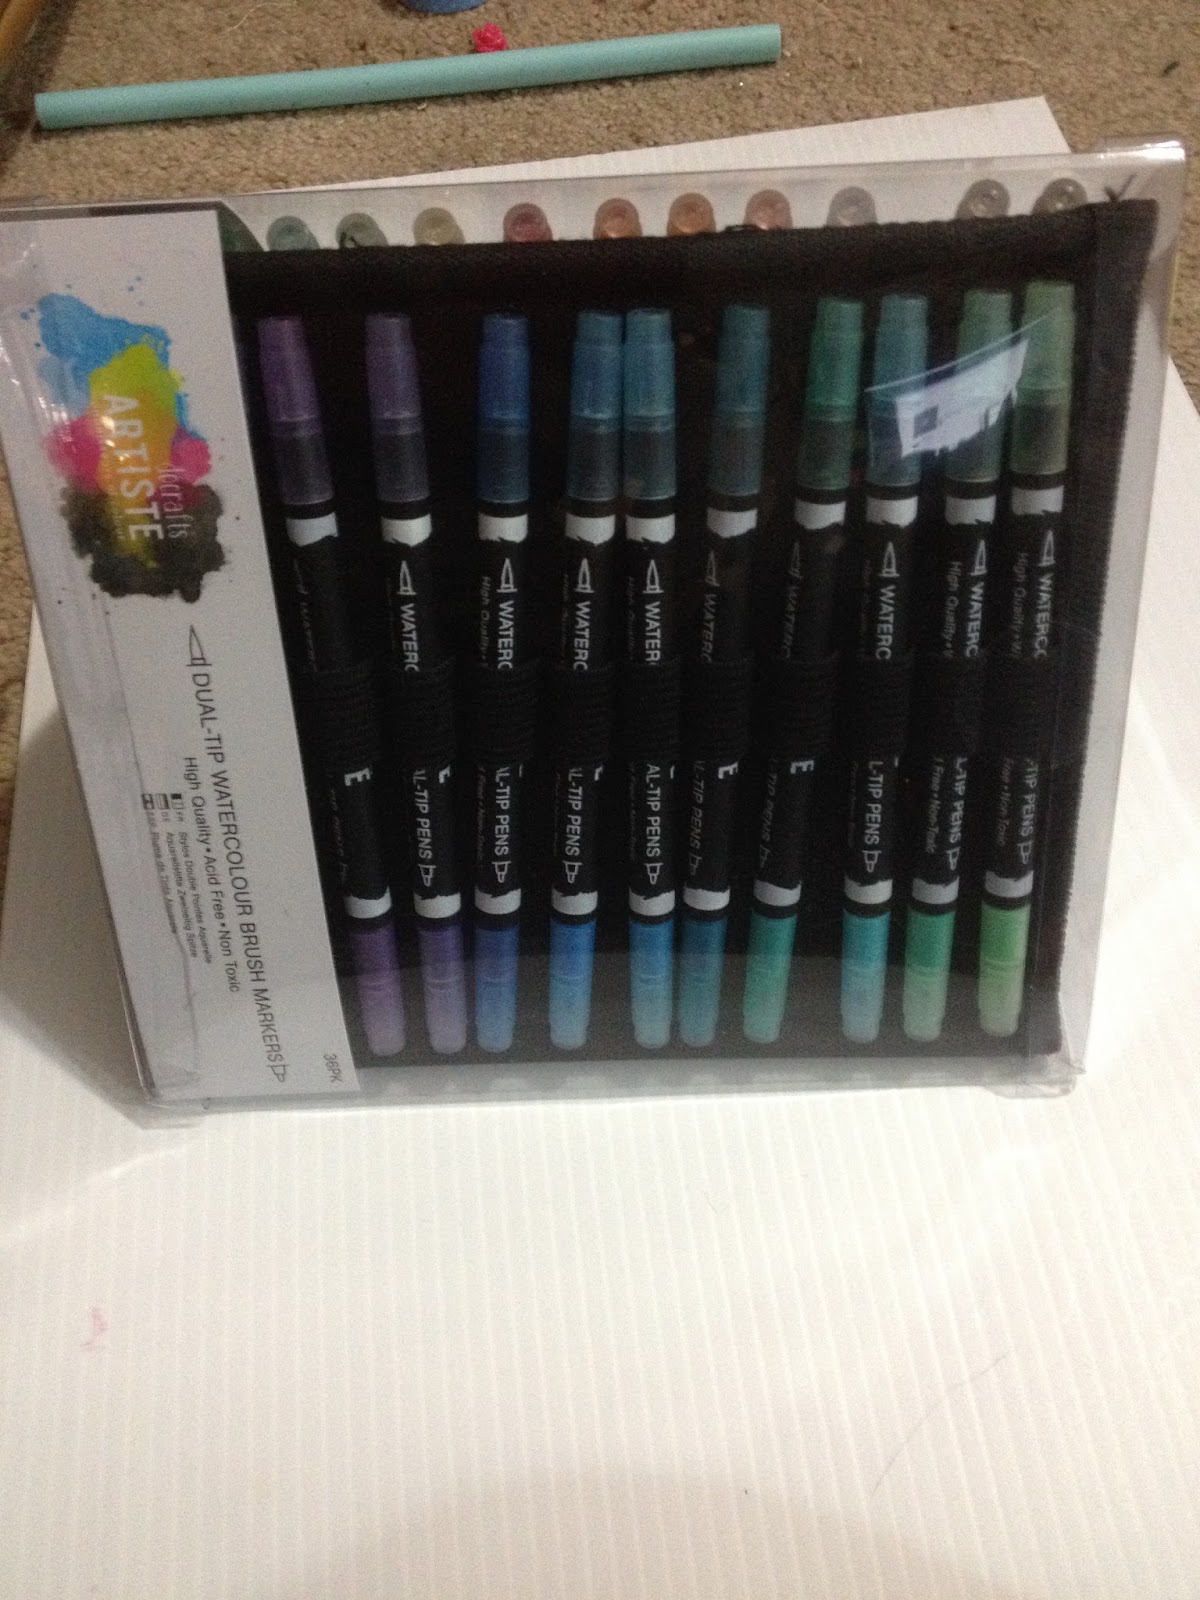 Watercolor 12 Color Dual-Tip Markers by Artist's Loft™